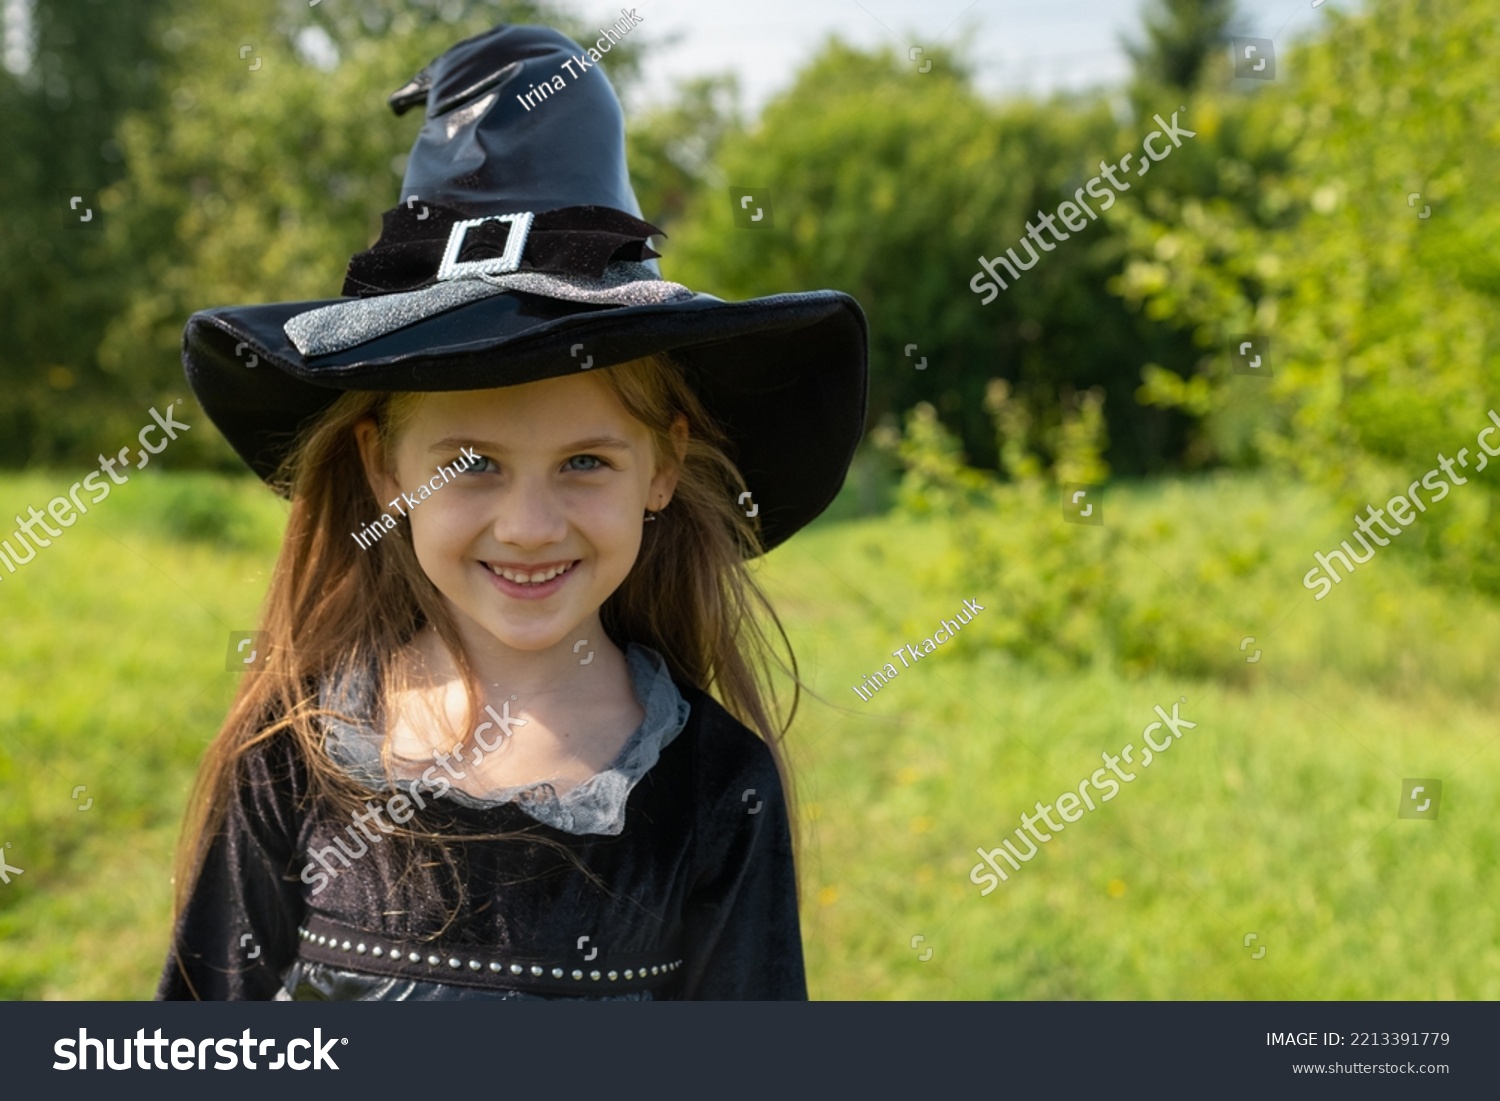 Halloween girl going to collect candy. Trick-or-treating. Guising. Jack-o-lantern. Child in carnival costume witch outdoors. Celebrate halloween. Girl in forest smiling and holding basket of sweets #2213391779